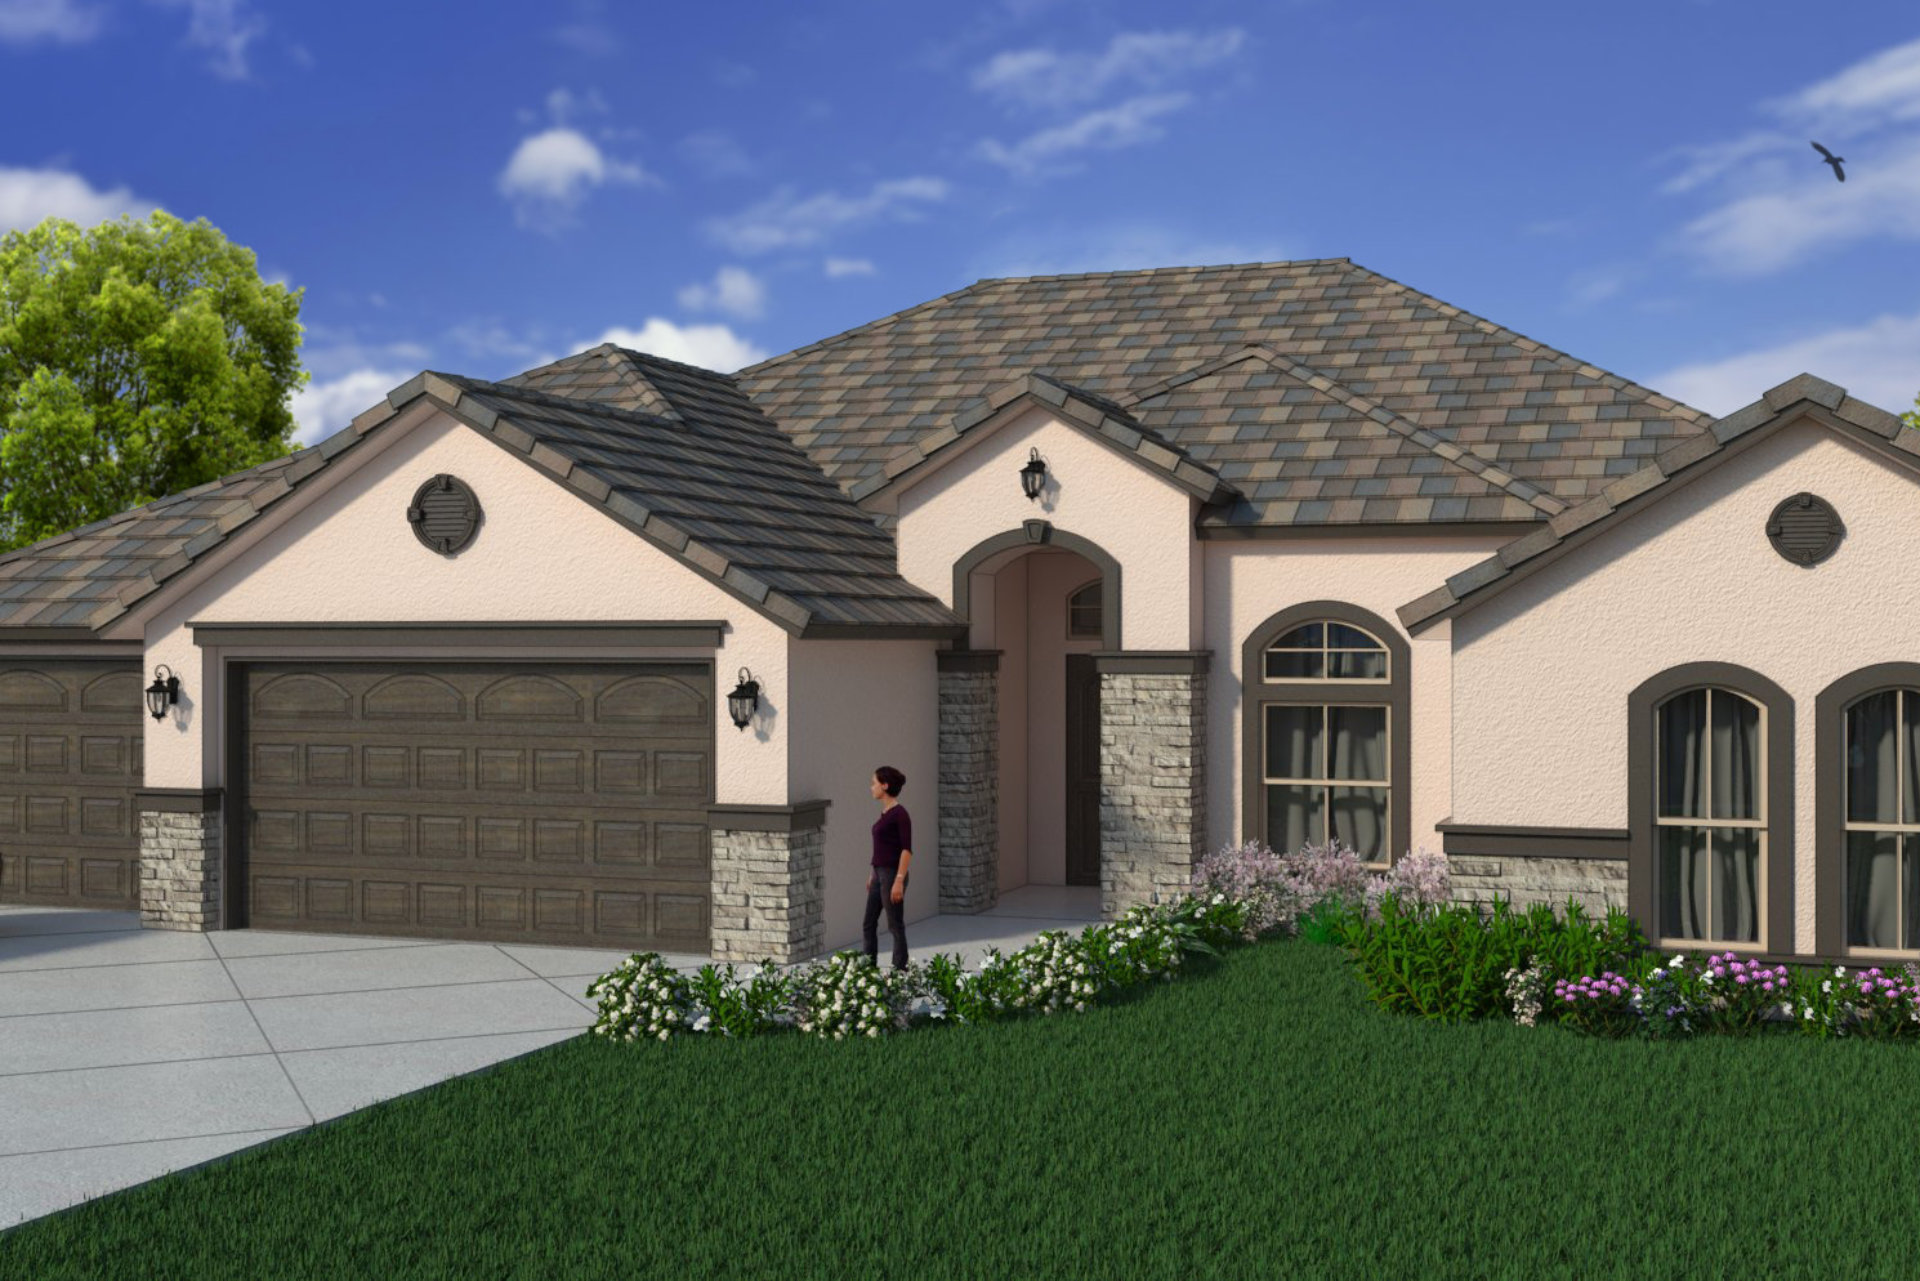 Render of new home with woman standing in front